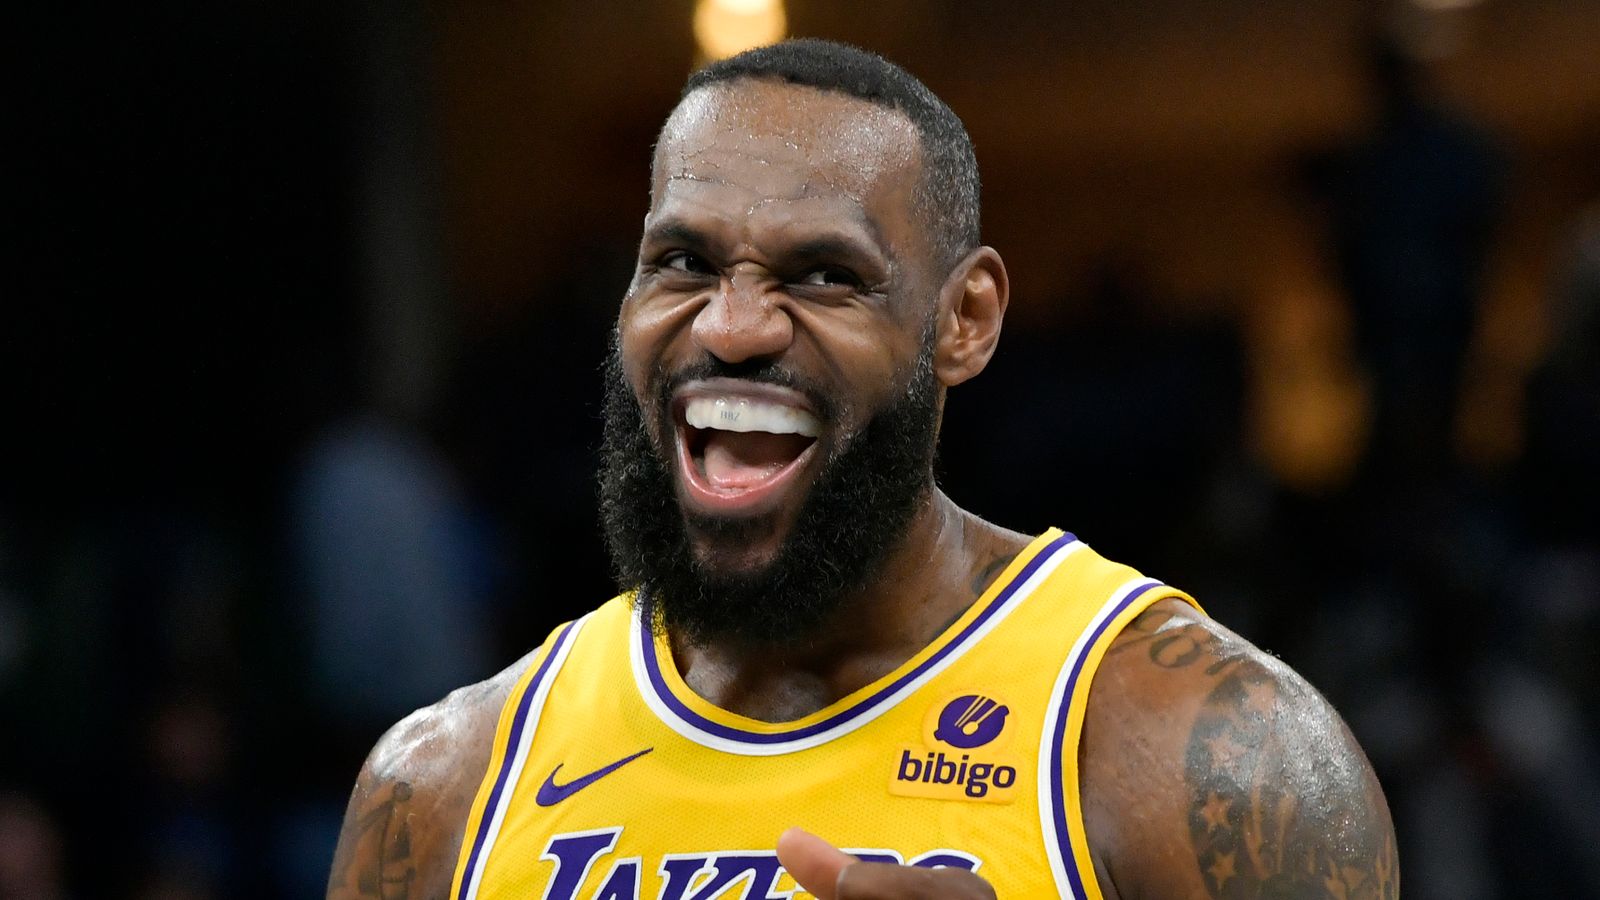 LeBron James, Steph Curry and Kevin Durant named on USA basketball team for Paris 2024 Olympics | Olympics News